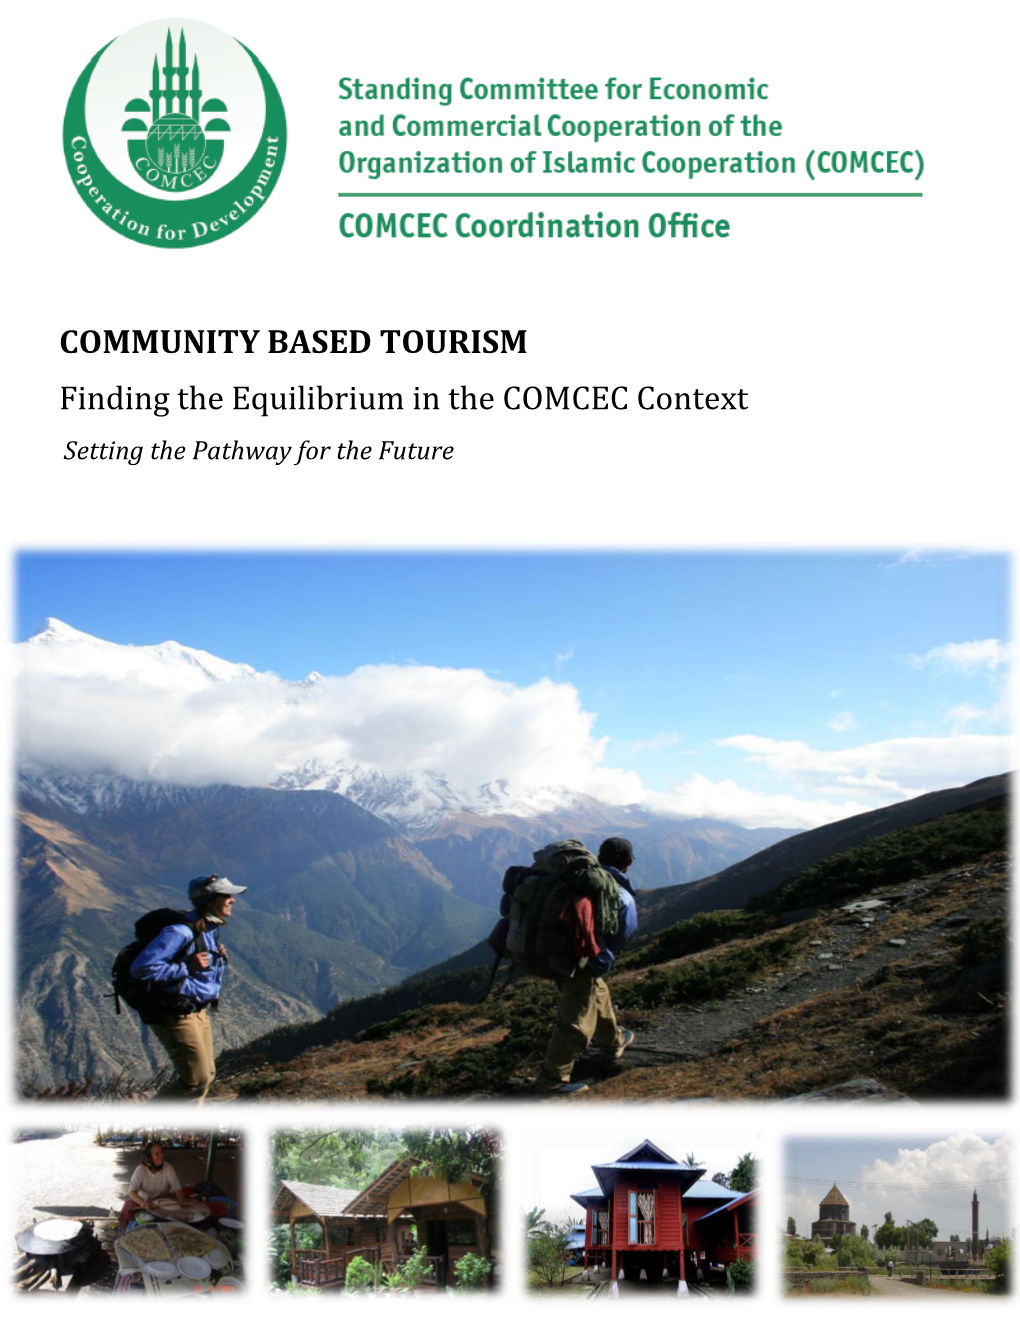 Community Based Tourism Finding the Equilibrium in the COMCEC